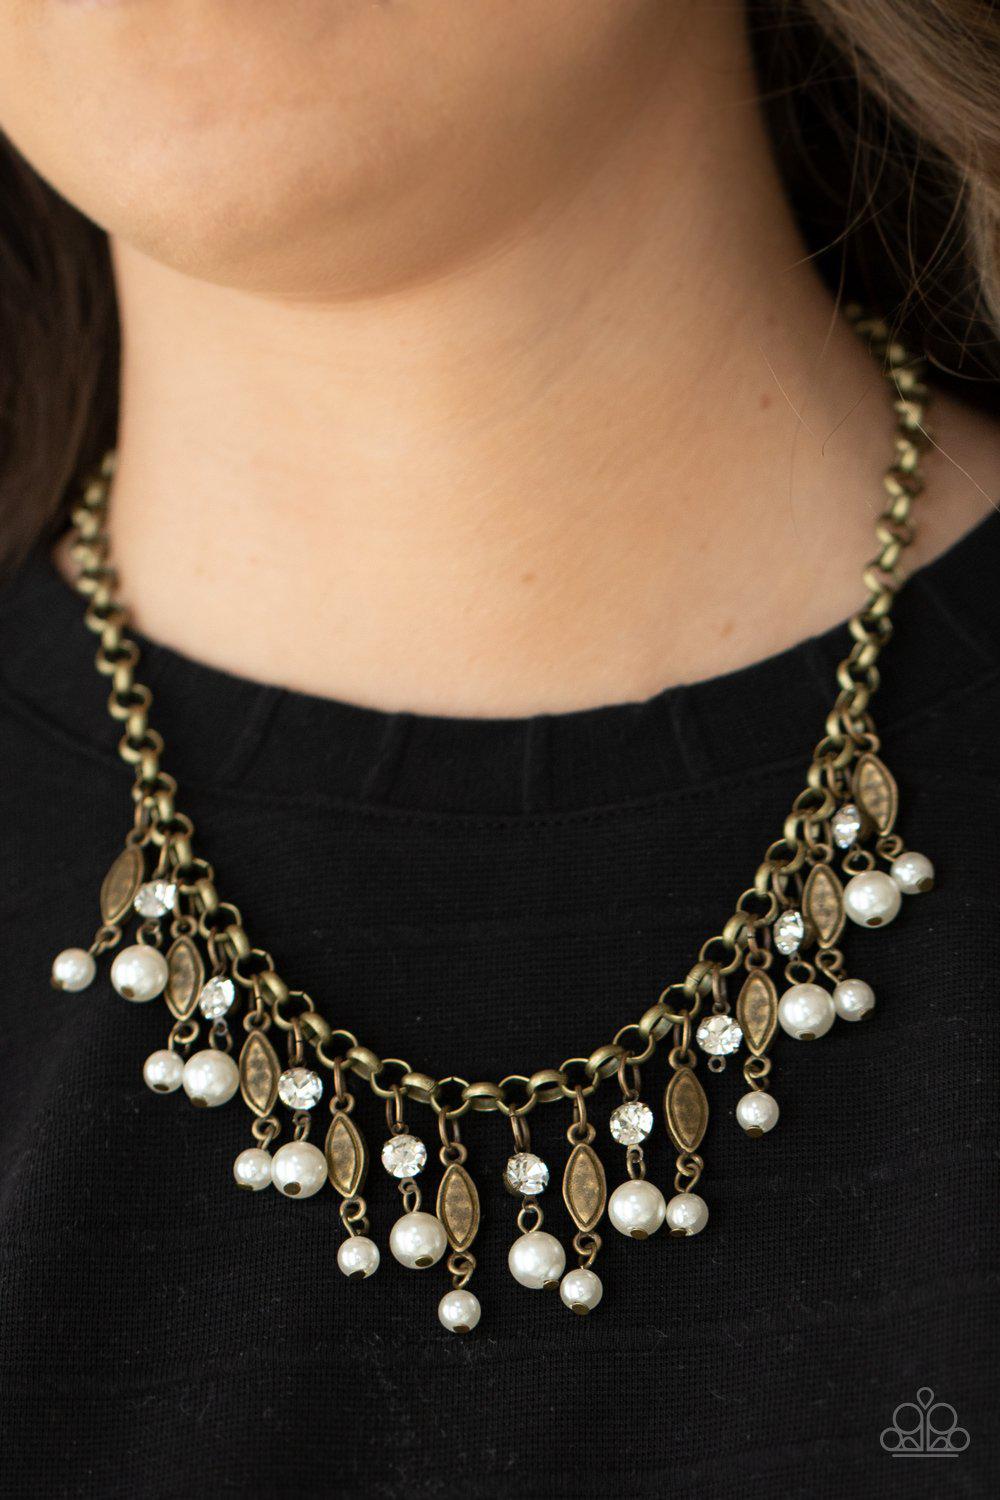 Cosmopolitan Couture Brass and White Pearl and Rhinestone Necklace - Paparazzi Accessories- lightbox - CarasShop.com - $5 Jewelry by Cara Jewels